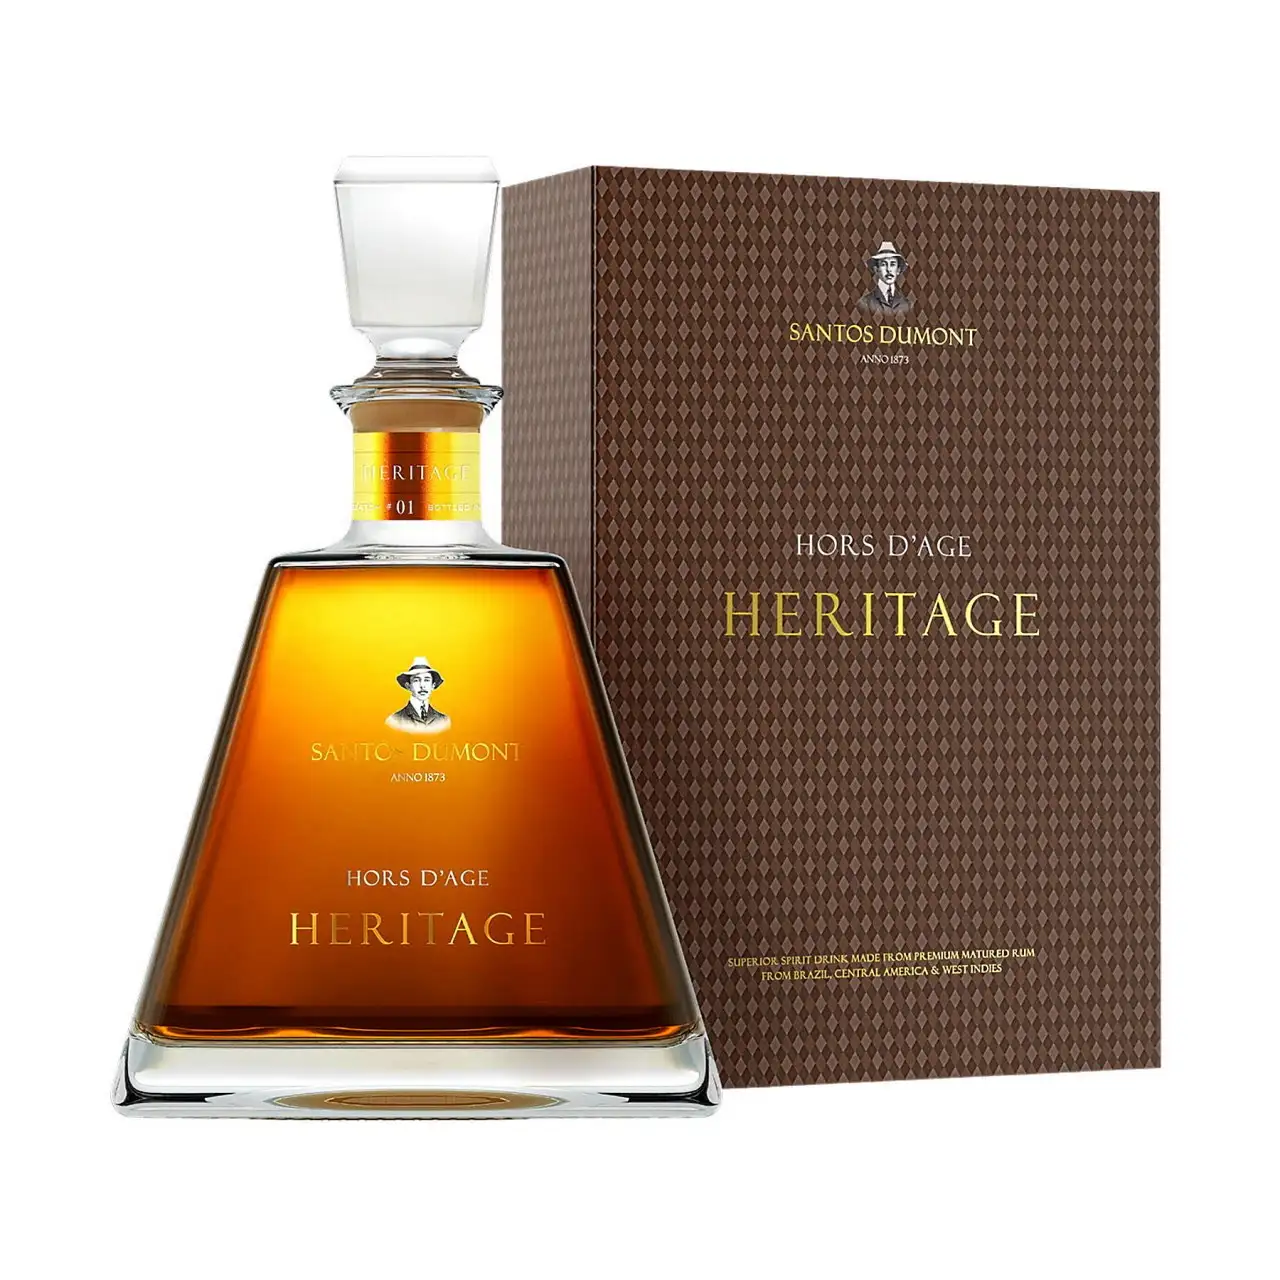 Image of the front of the bottle of the rum Santos Dumont Heritage Hors d'Age